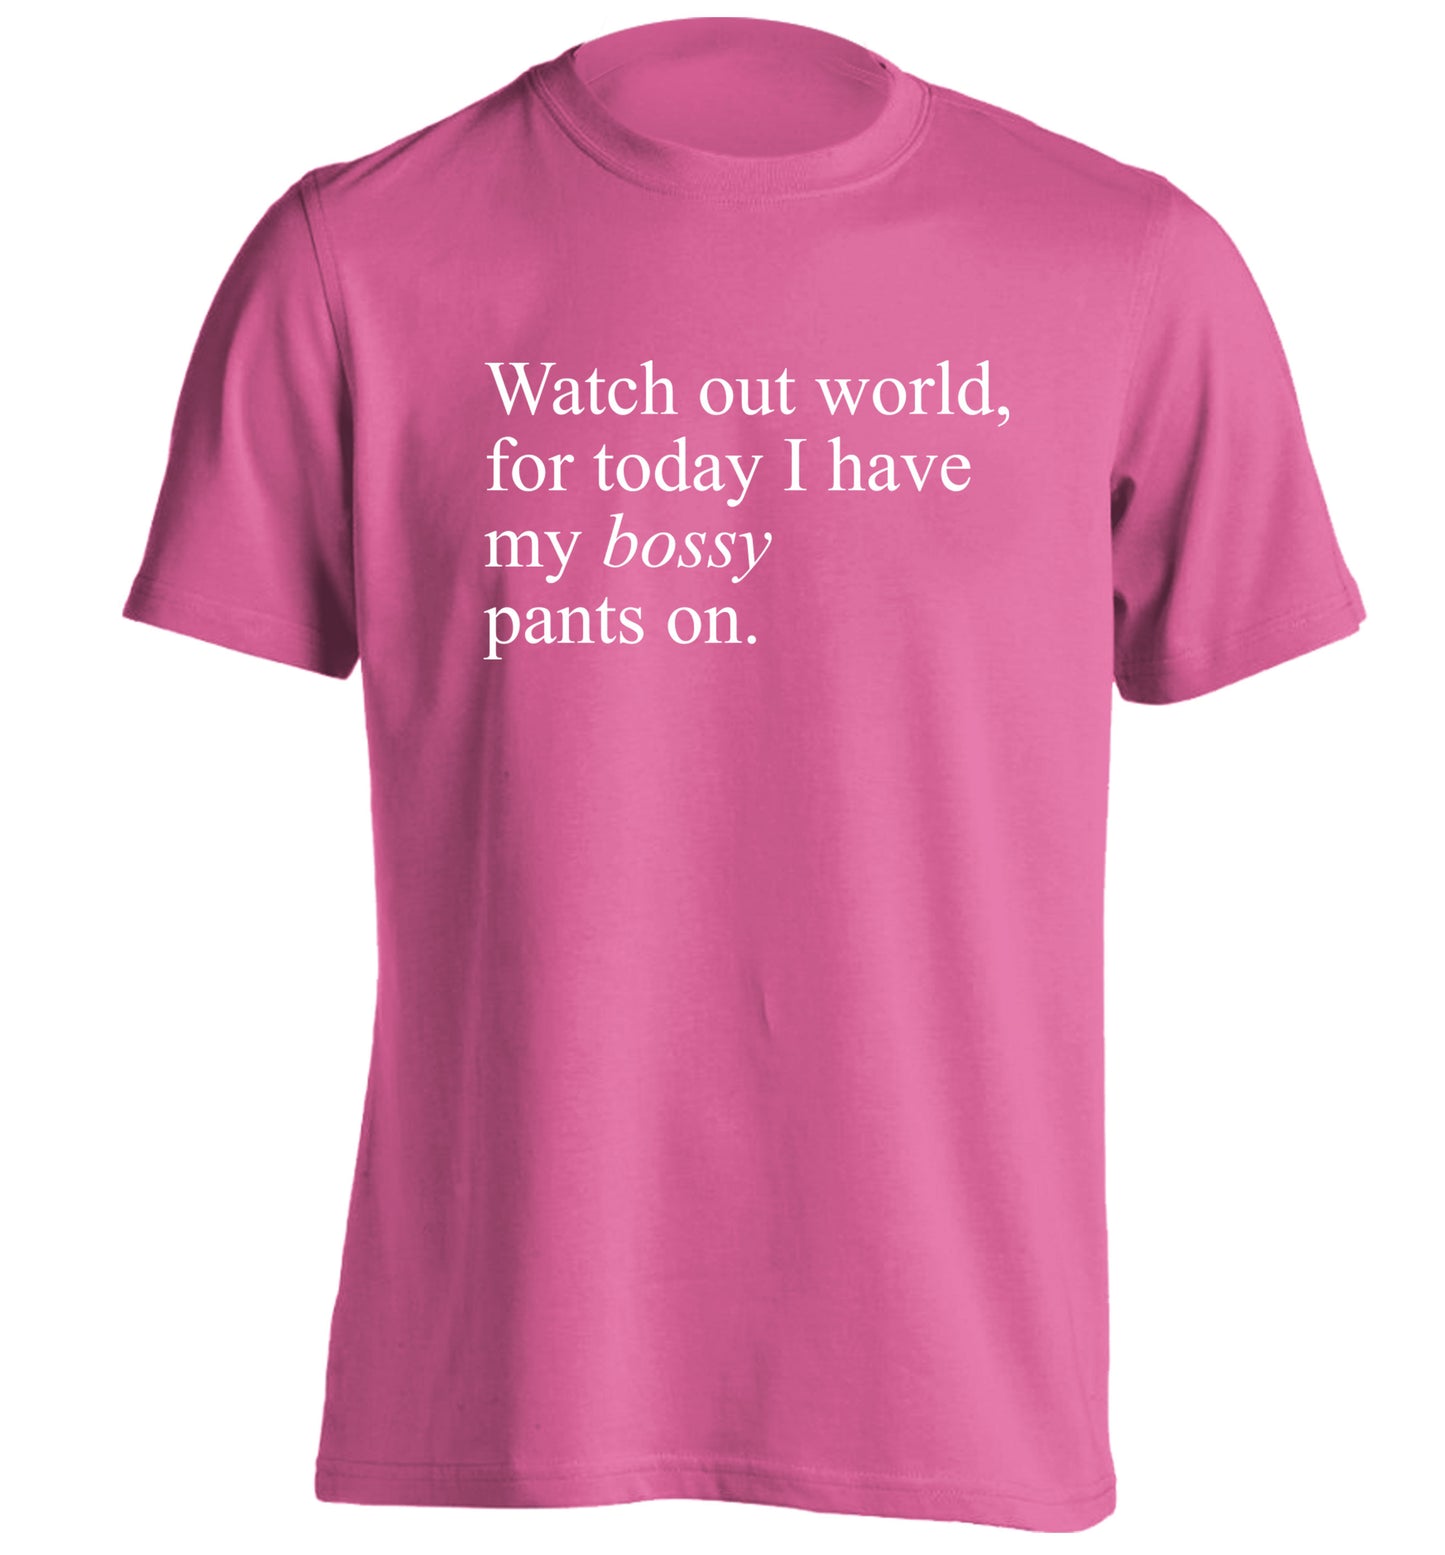 Watch out world, for today I have my bossy pants on adults unisex pink Tshirt 2XL